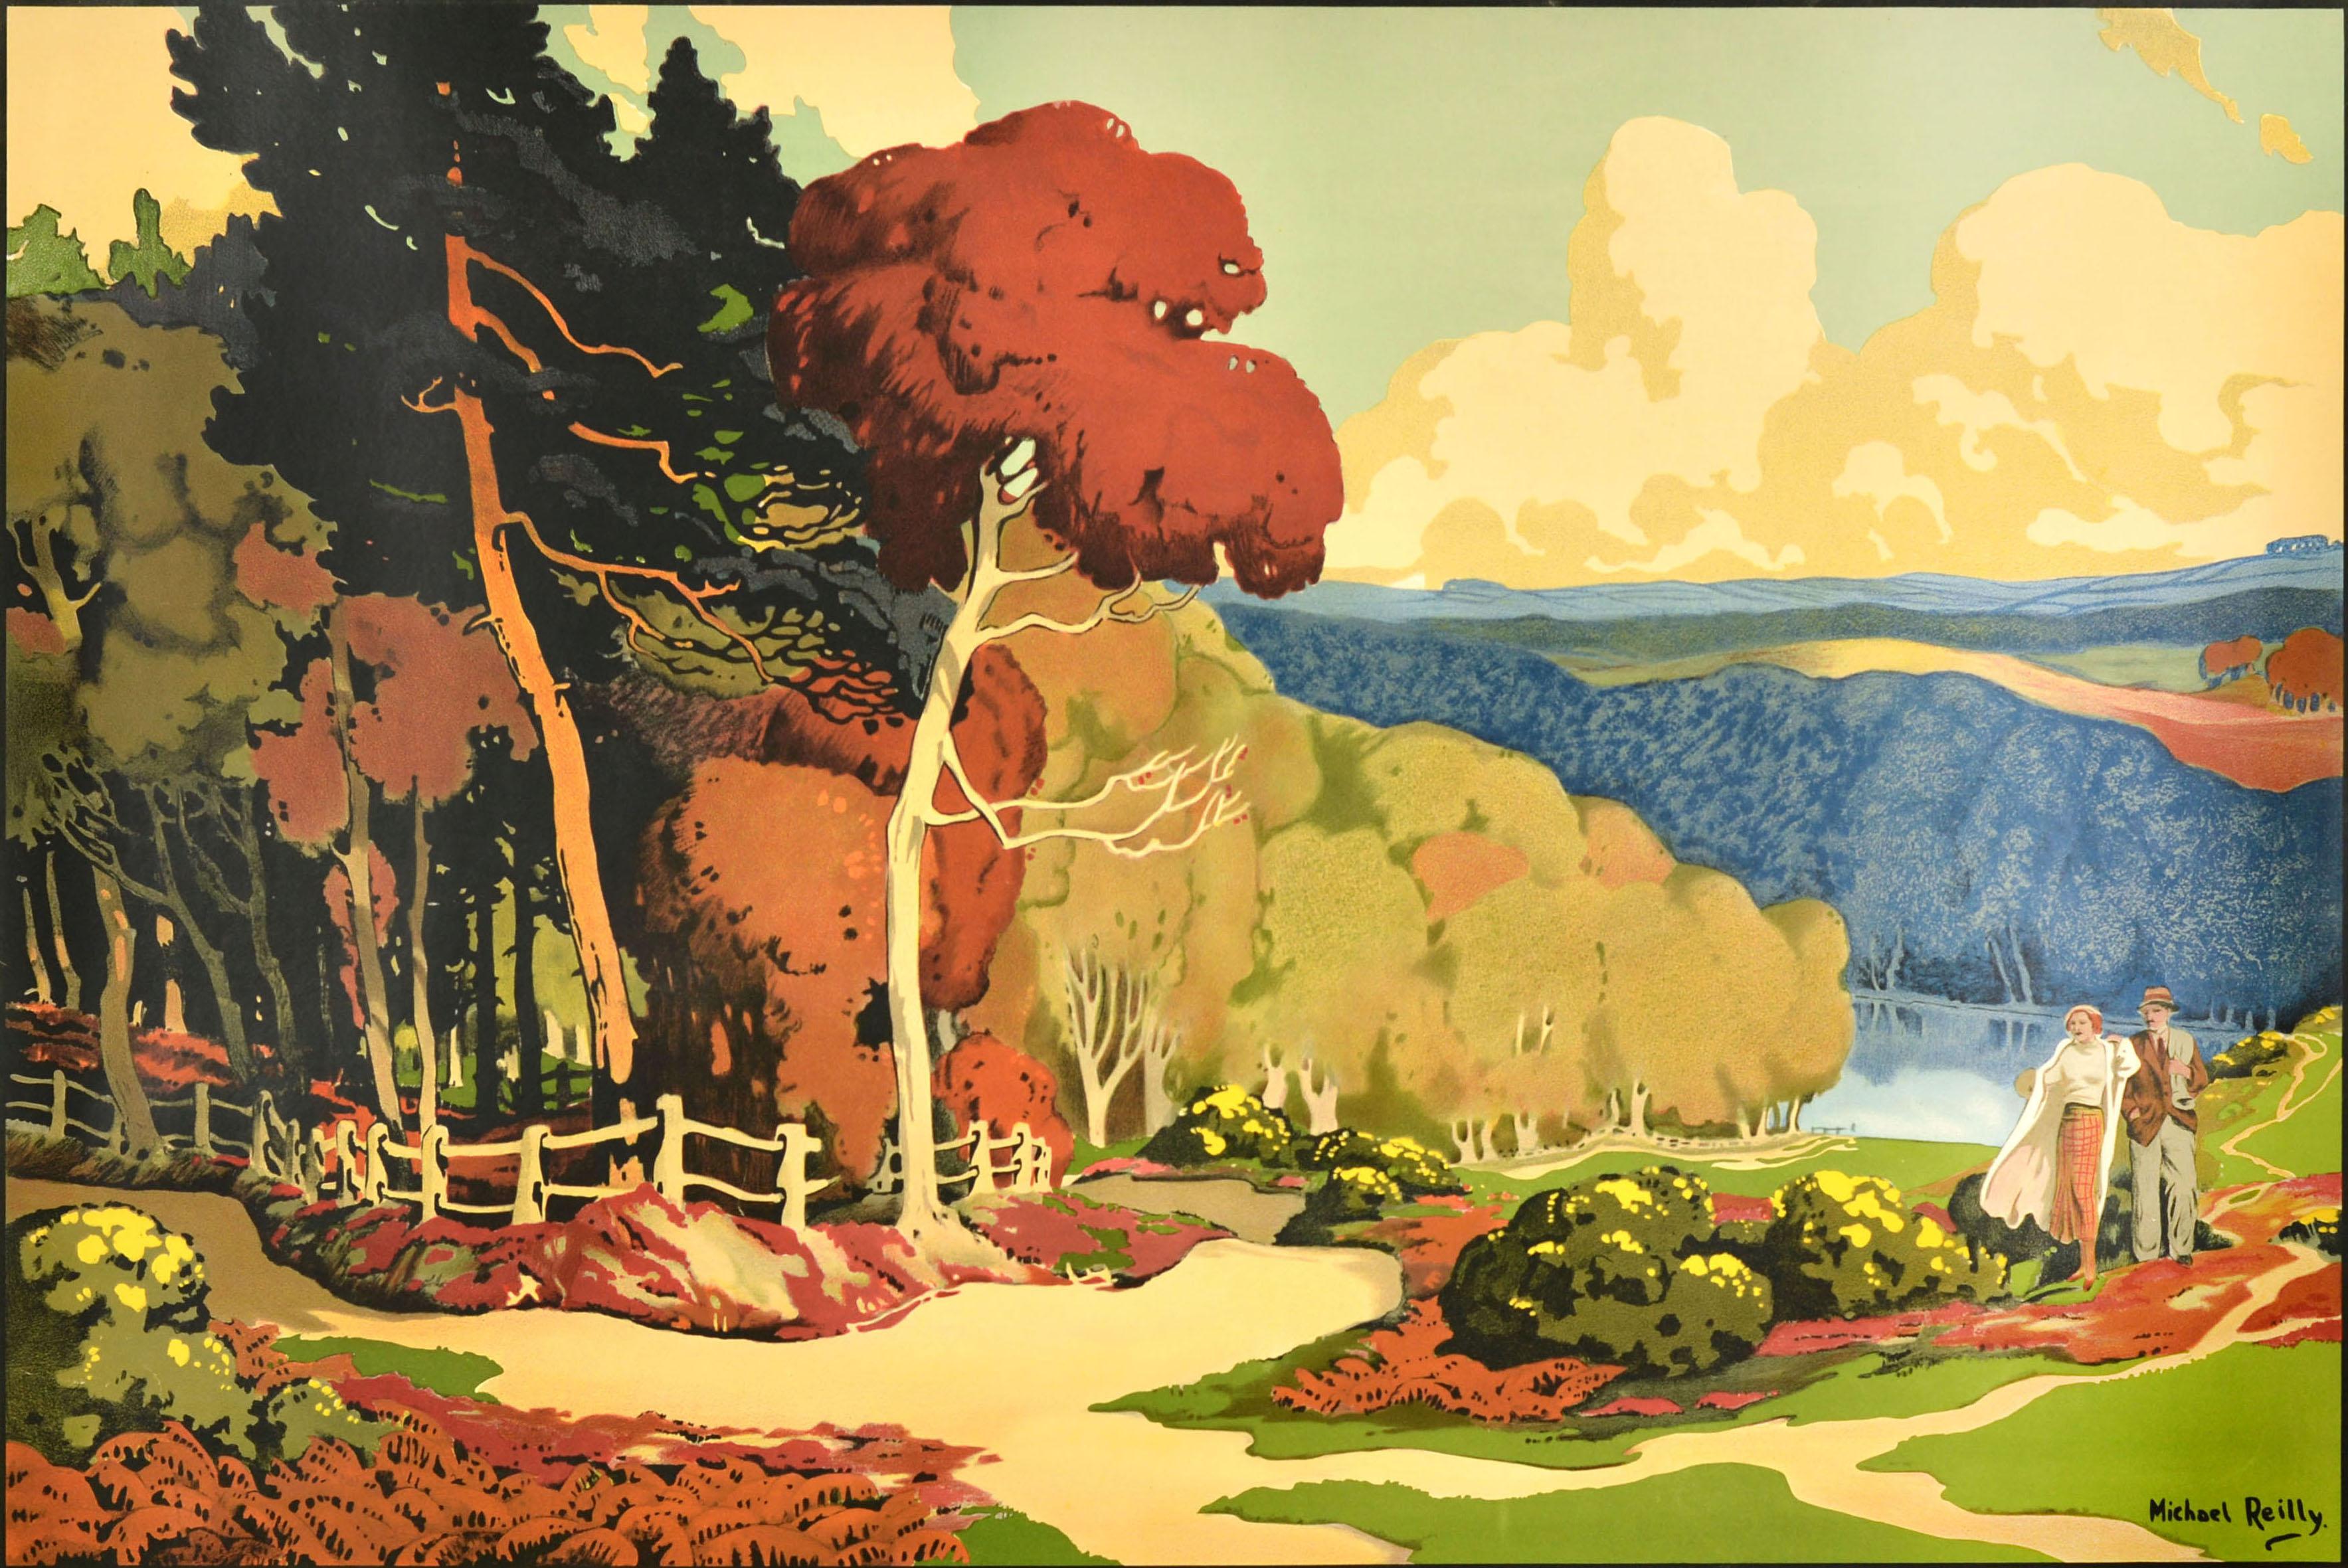 Original vintage travel poster for the Royal Town of Sutton Coldfield Sutton Park featuring stunning artwork by Michael Reilly (b.1898) depicting a couple enjoying a walk on a hill past trees in the park with a calm reflective lake and fields in the